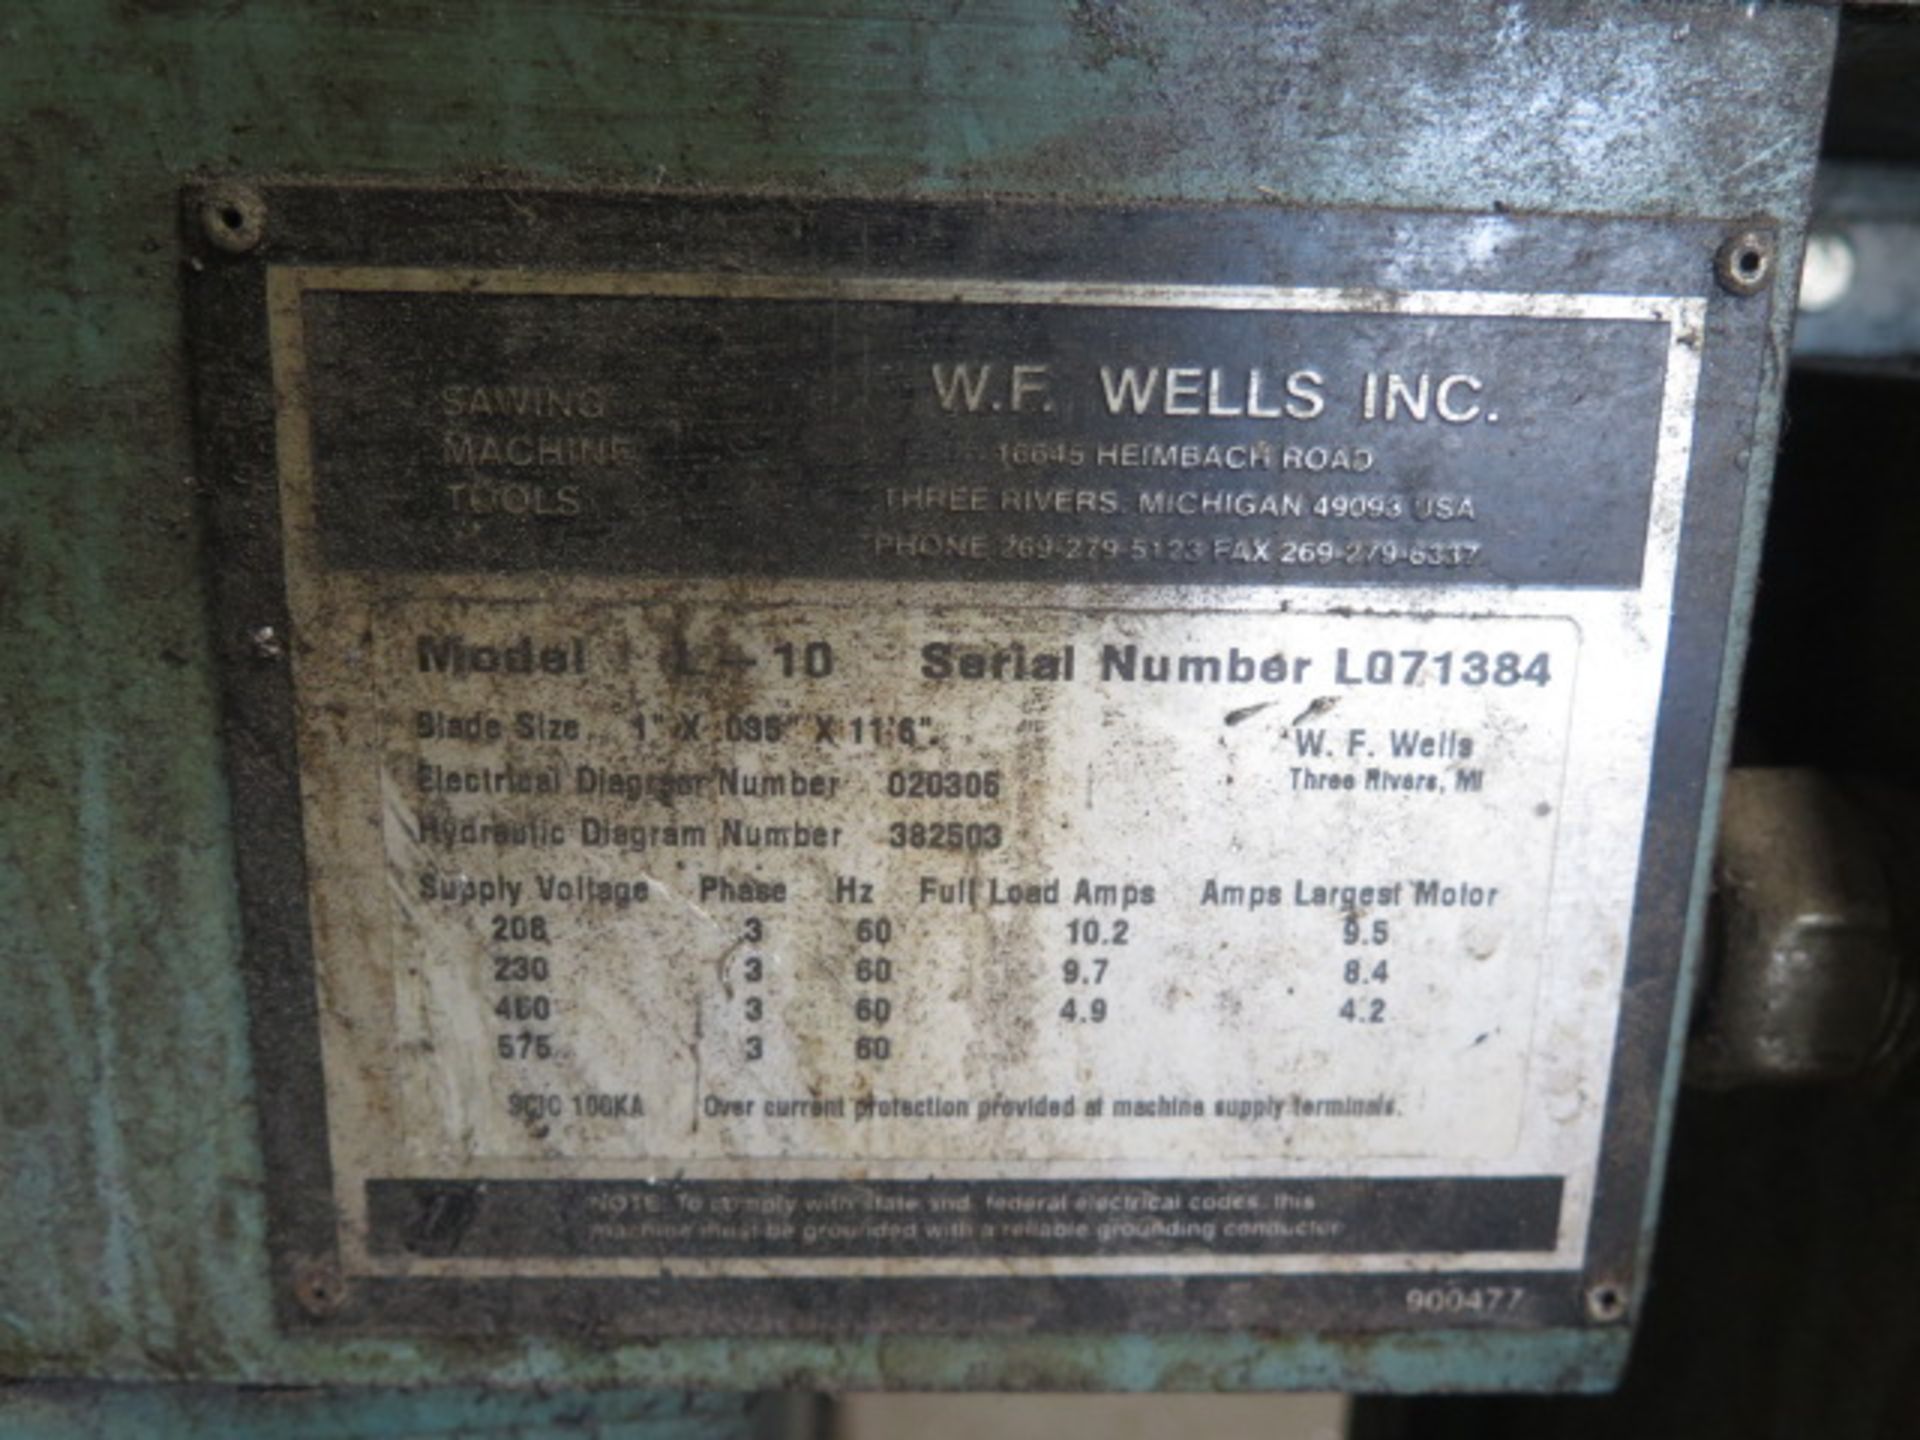 W.F.Wells mdl. L-10 10” Horizontal Band Saw s/n L071384 w/ Manual Clamping, Coolant, Conveyors - Image 9 of 9